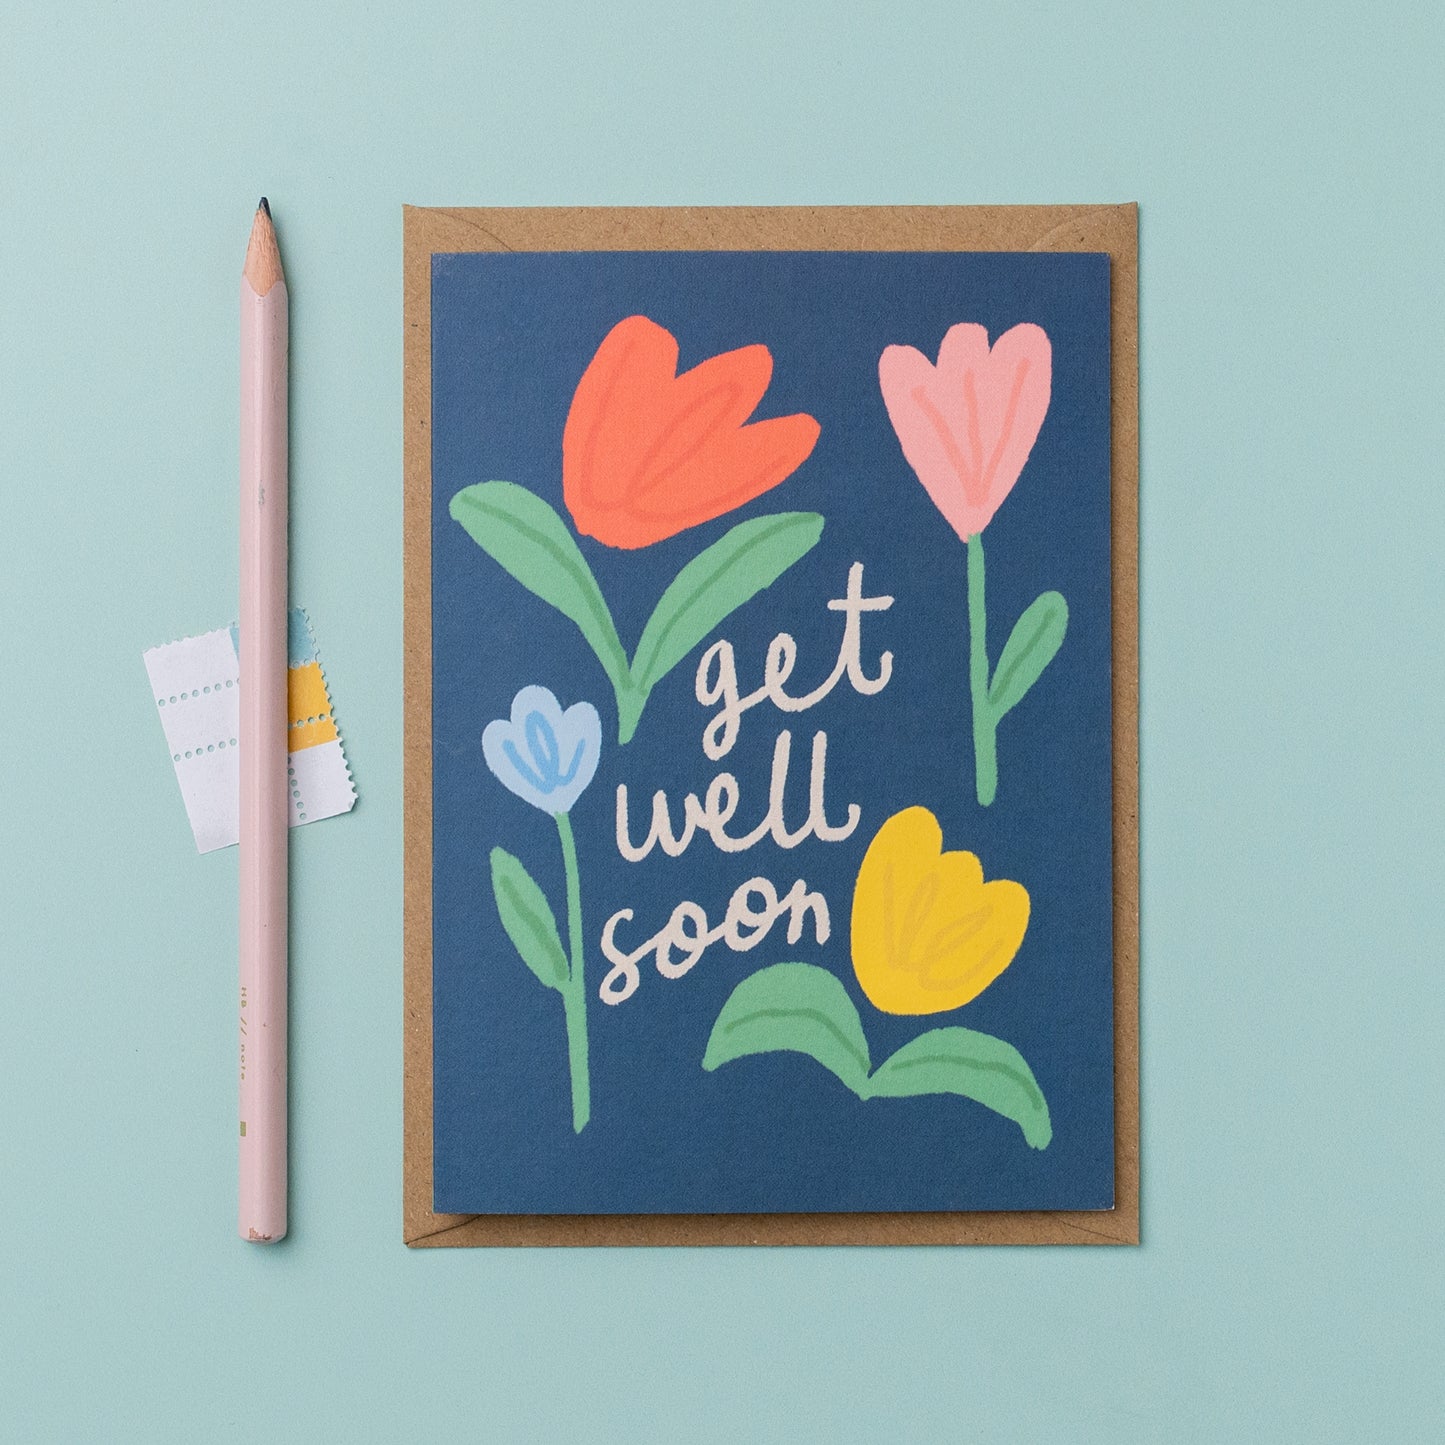 Get well soon floral card